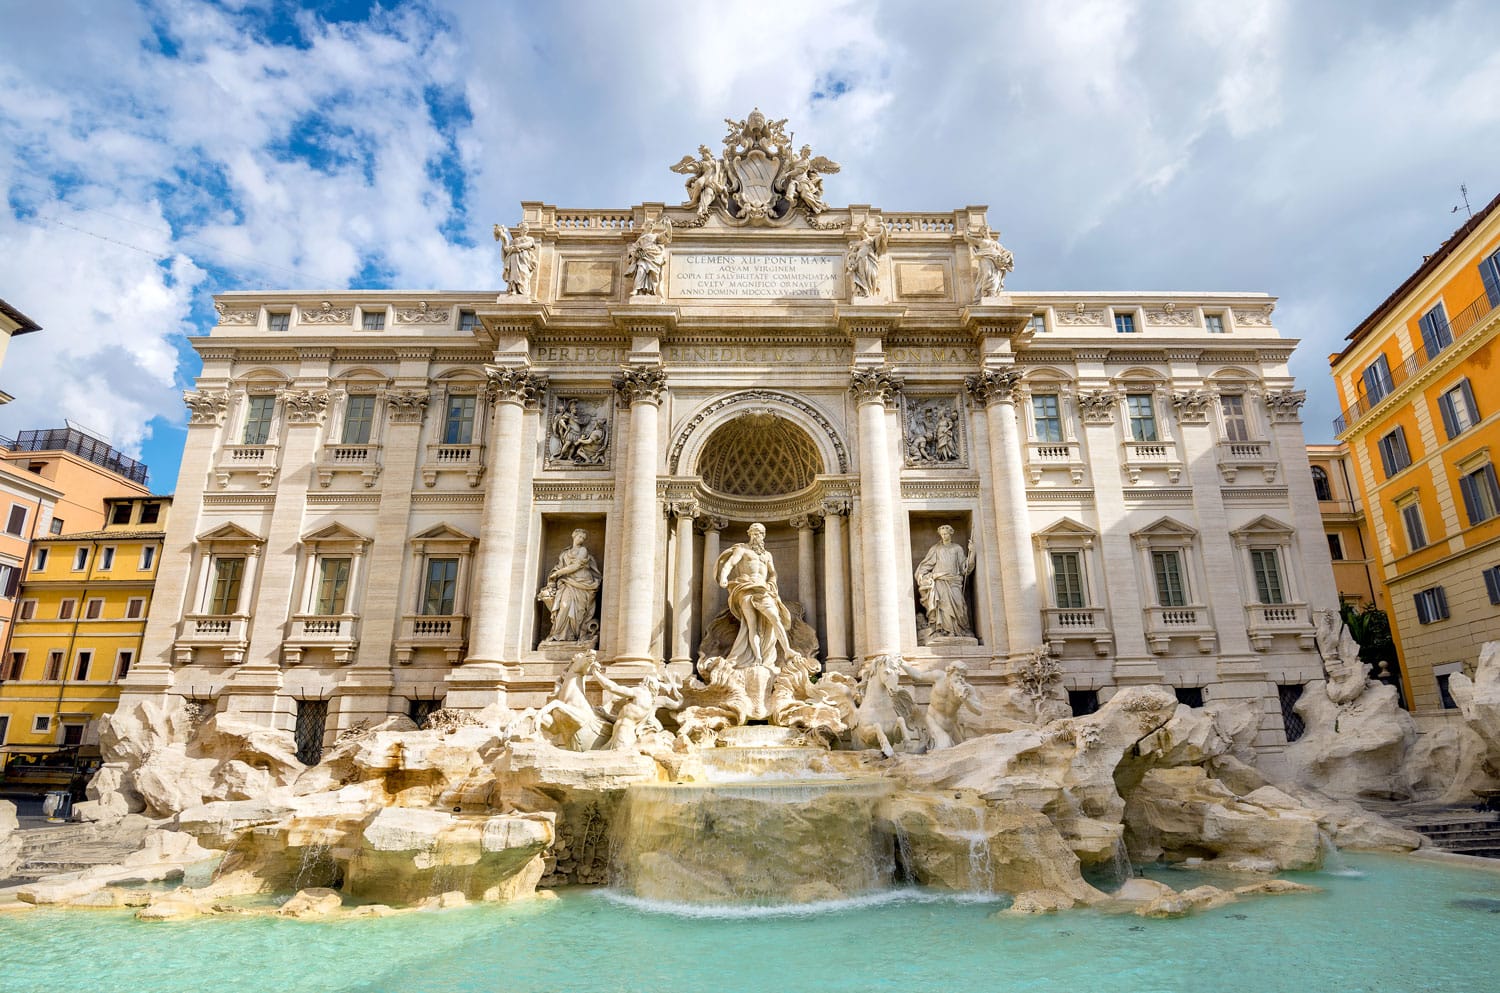 Famous fountain Trevi in Rome. Italy